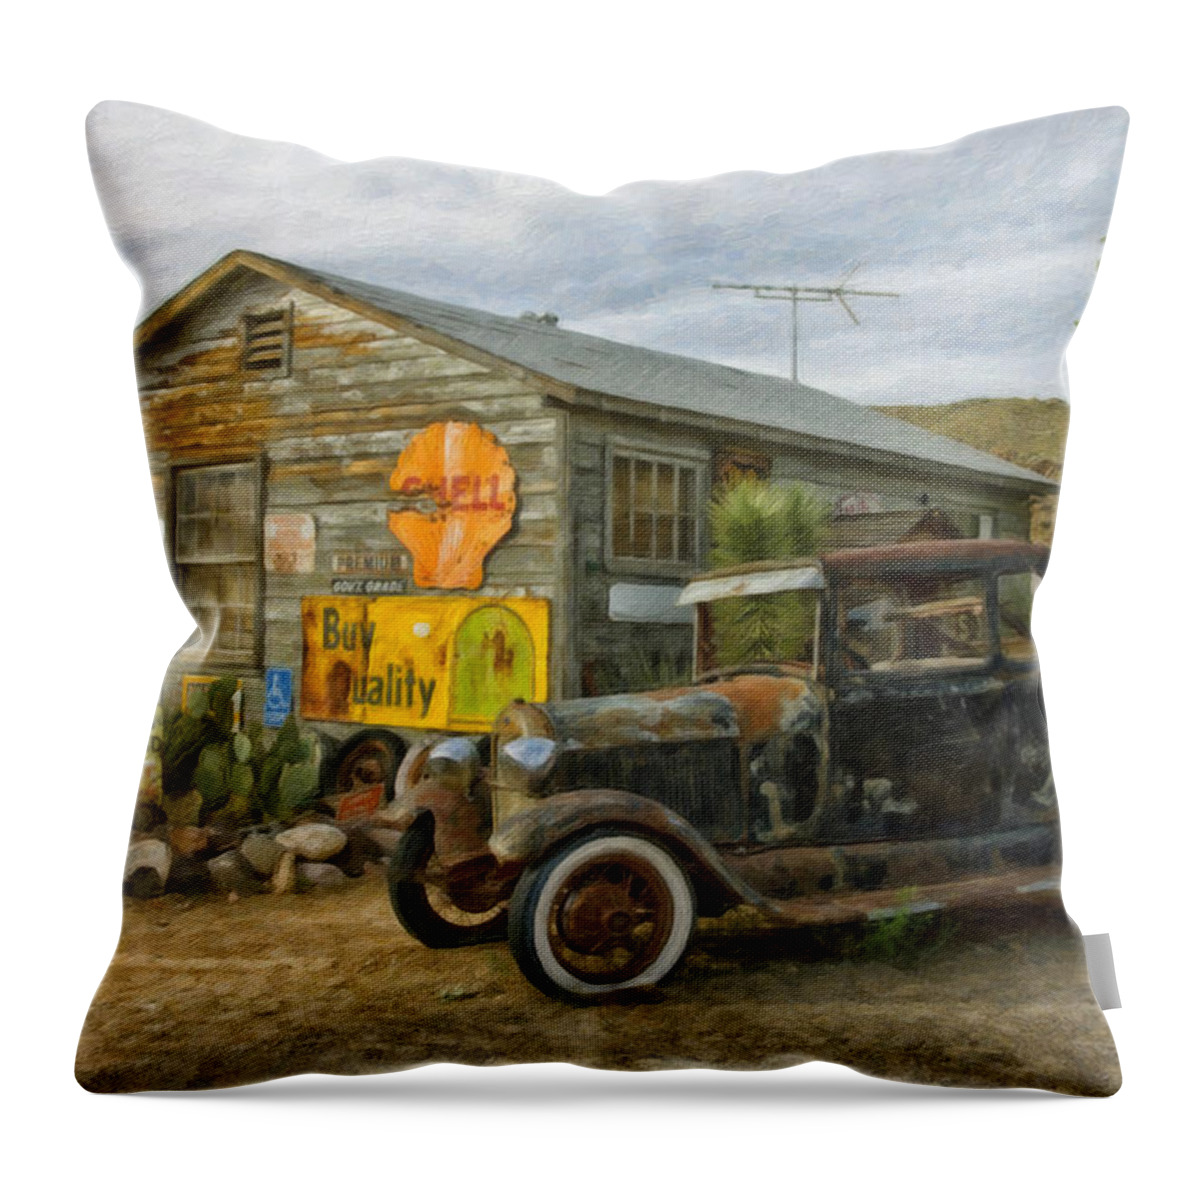 Landscape Throw Pillow featuring the painting Automobile Veh392751 by Dean Wittle